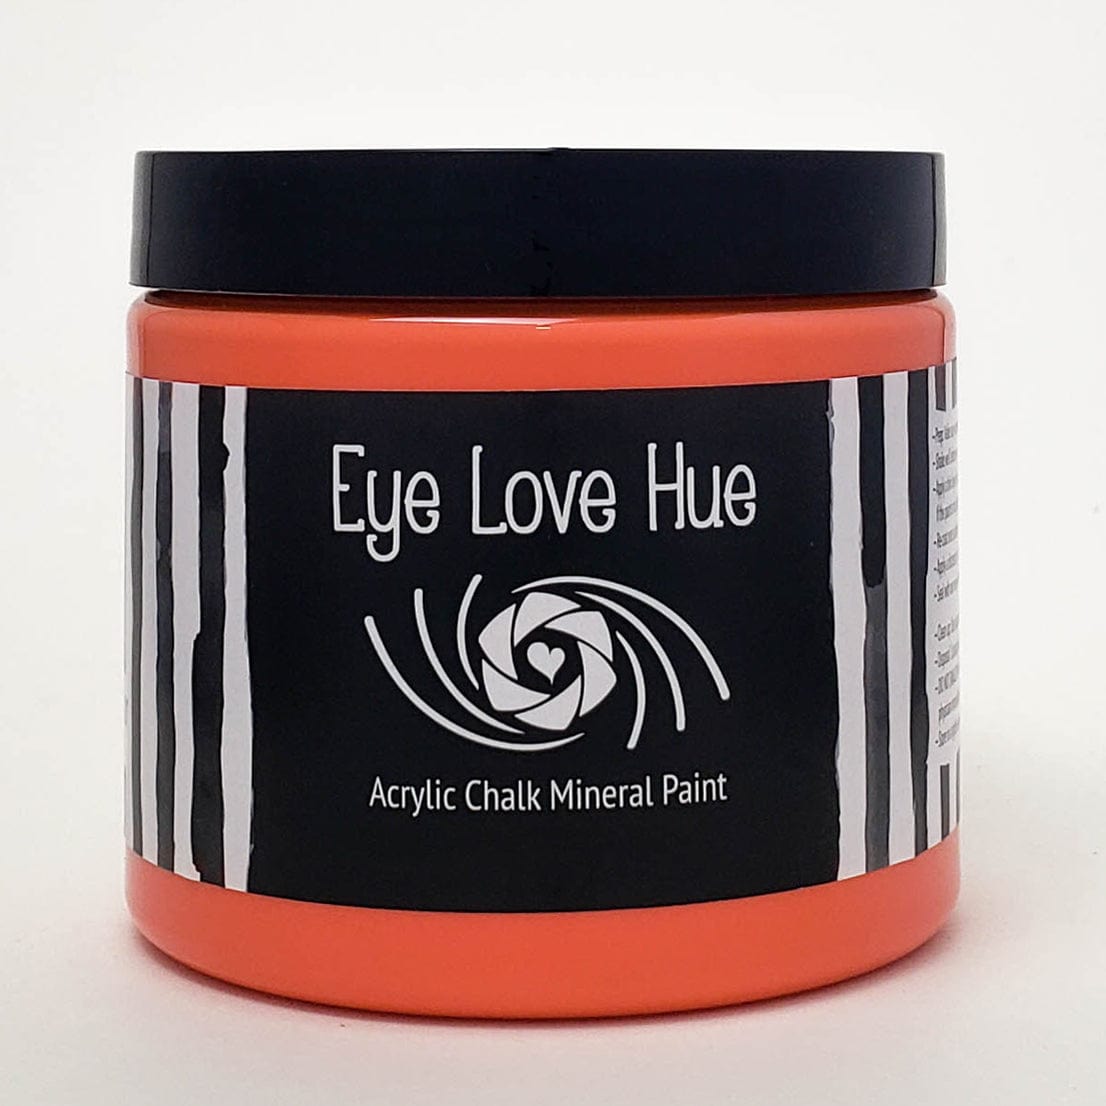 Eye Love Hue Paint & Products 16 oz Cosmopolitan Acrylic Mineral Paint Chalk Paint Clay Paint